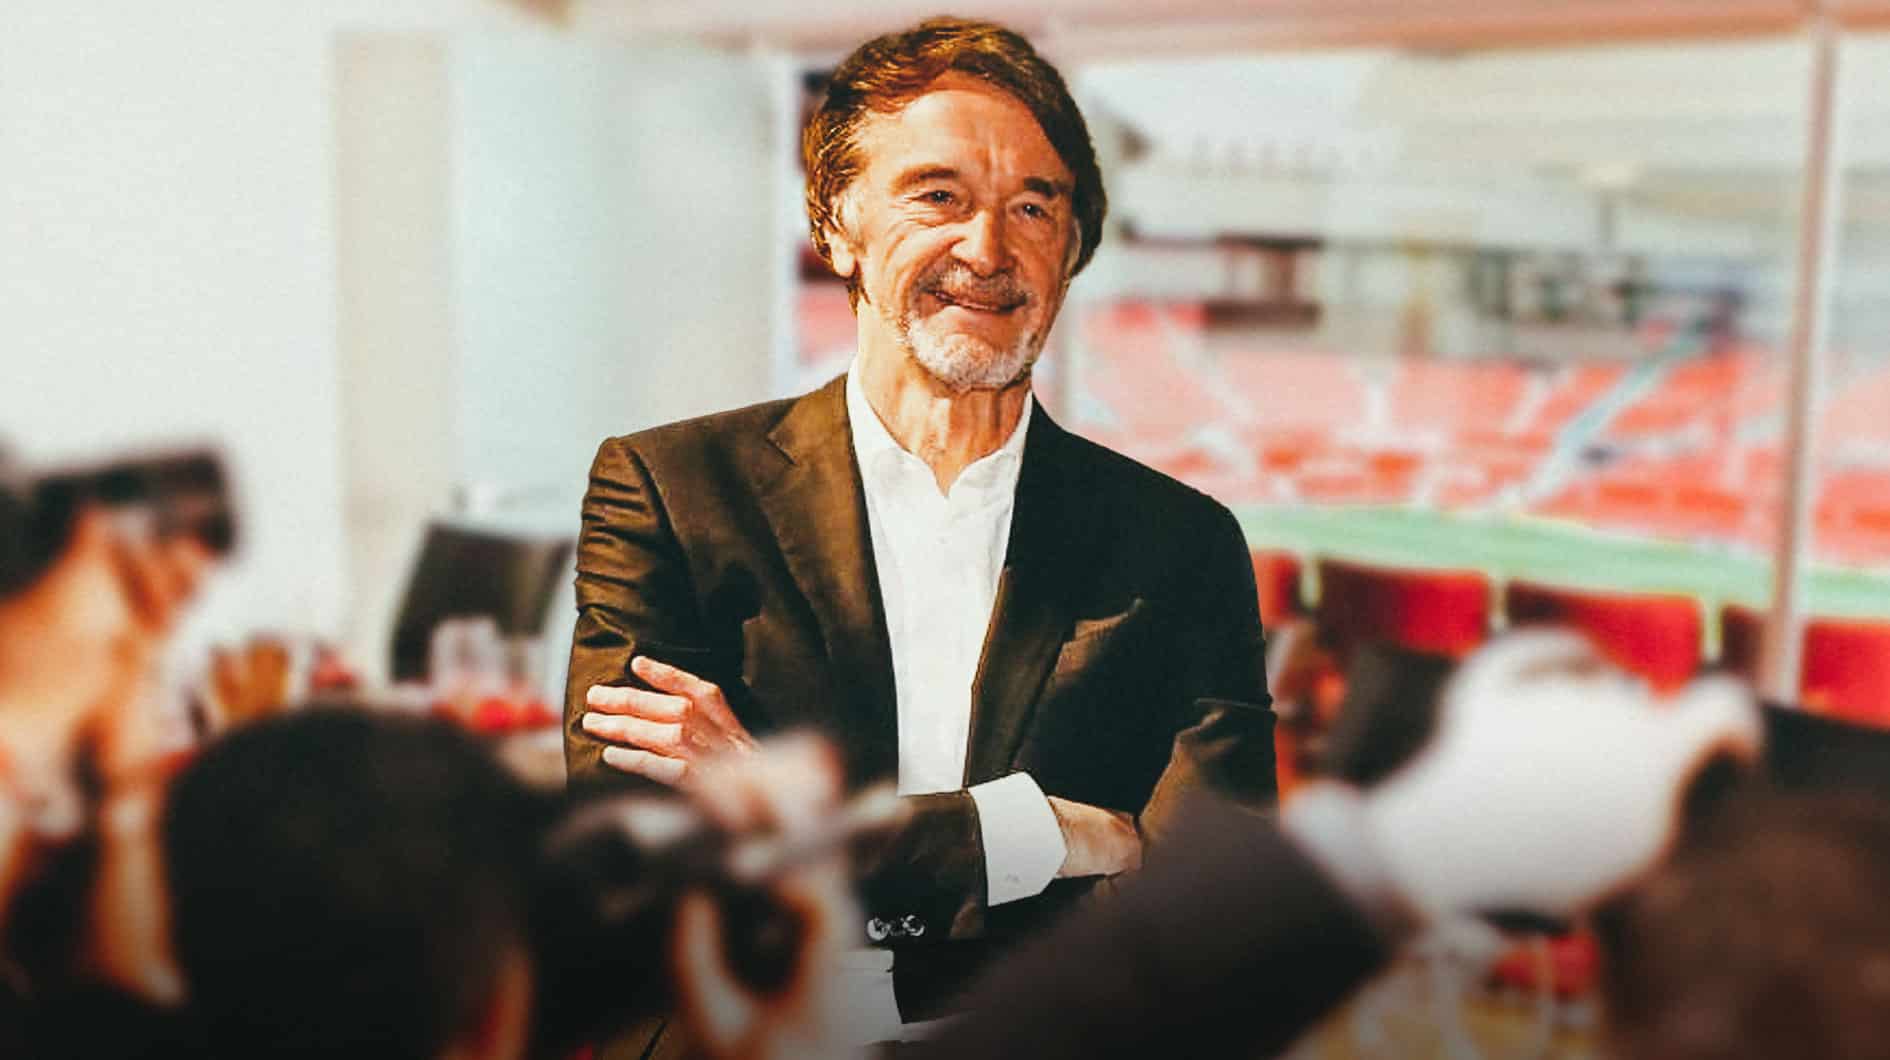 Sir Jim Ratcliffe puts a ban on Manchester United staff eating at player’s canteen